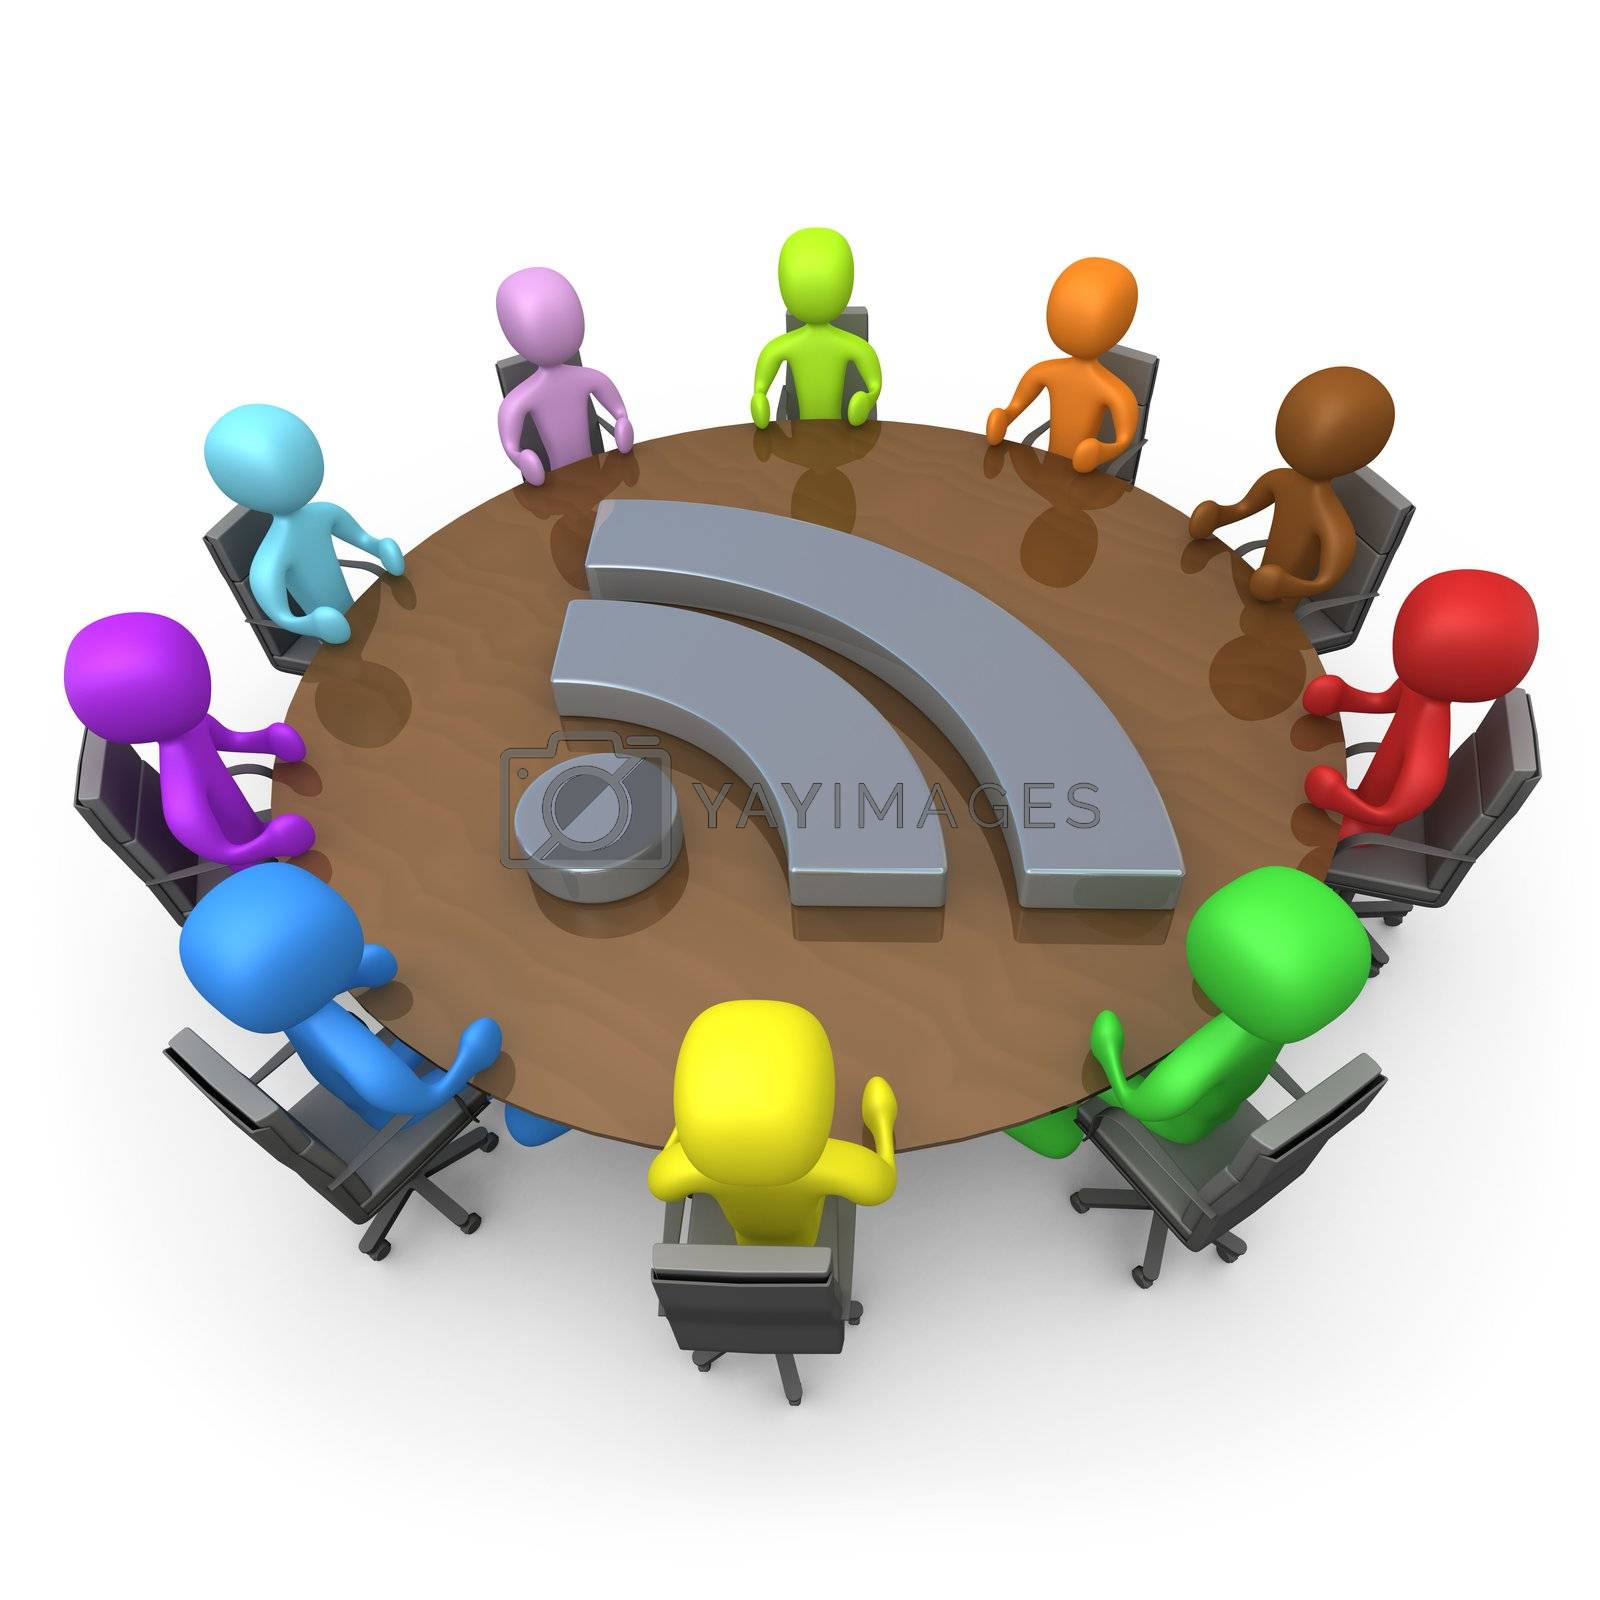 Royalty free image of Blog Discussion by 3pod